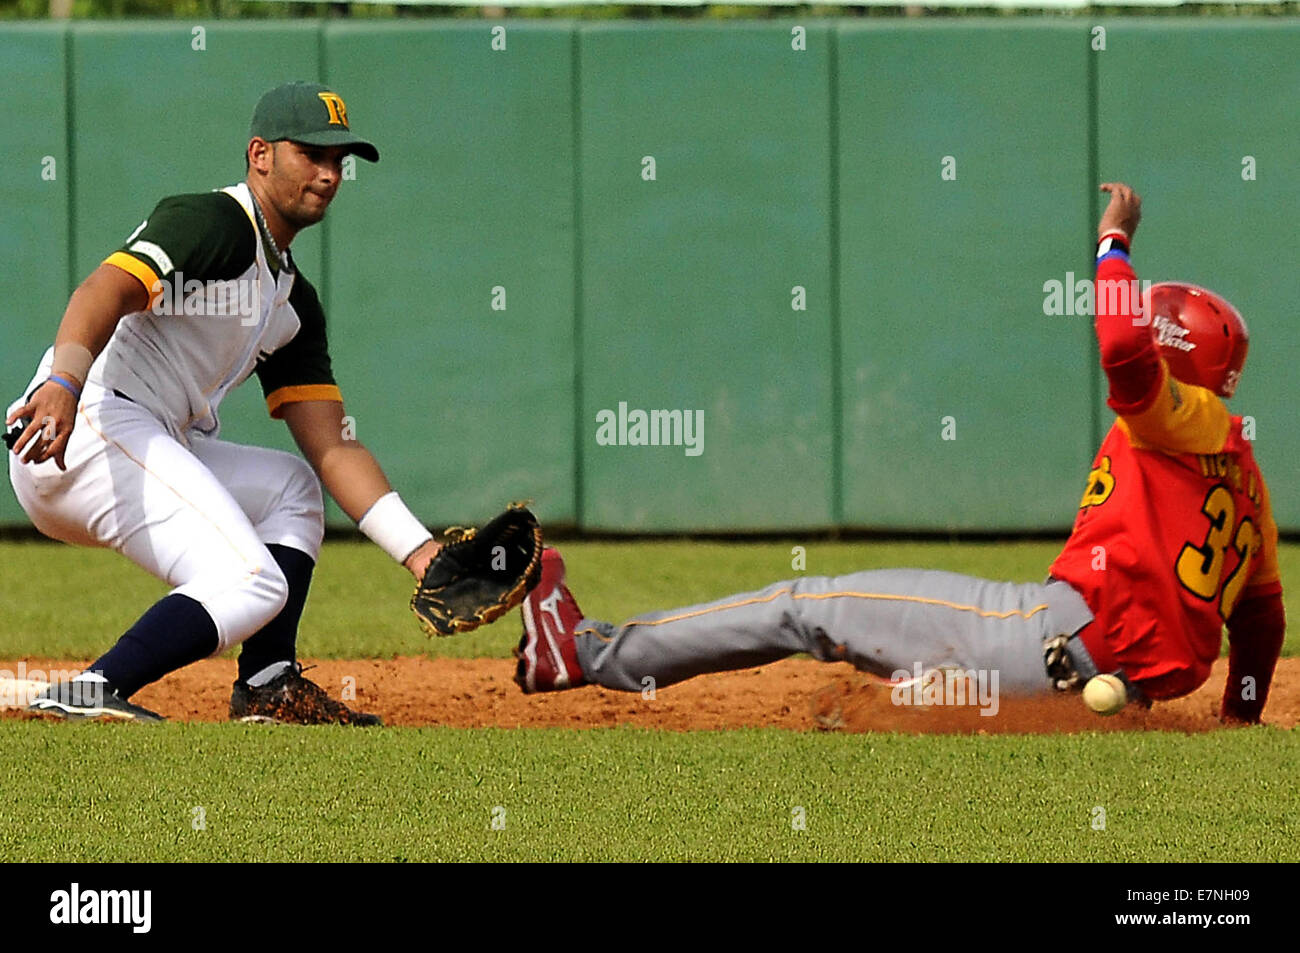 Havana. 21st Sep, 2014. Matanzas' Victor Victor Mesa (R) competes during the match of the 54th National Baseball Series against Pinar del Rio held in the Capitan San Luis Stadium in the Pinar del Rio province, 145km est of Havana, Cuba, on Sept. 21, 2014 © Joaquin Hernandez/Xinhua/Alamy Live News Stock Photo